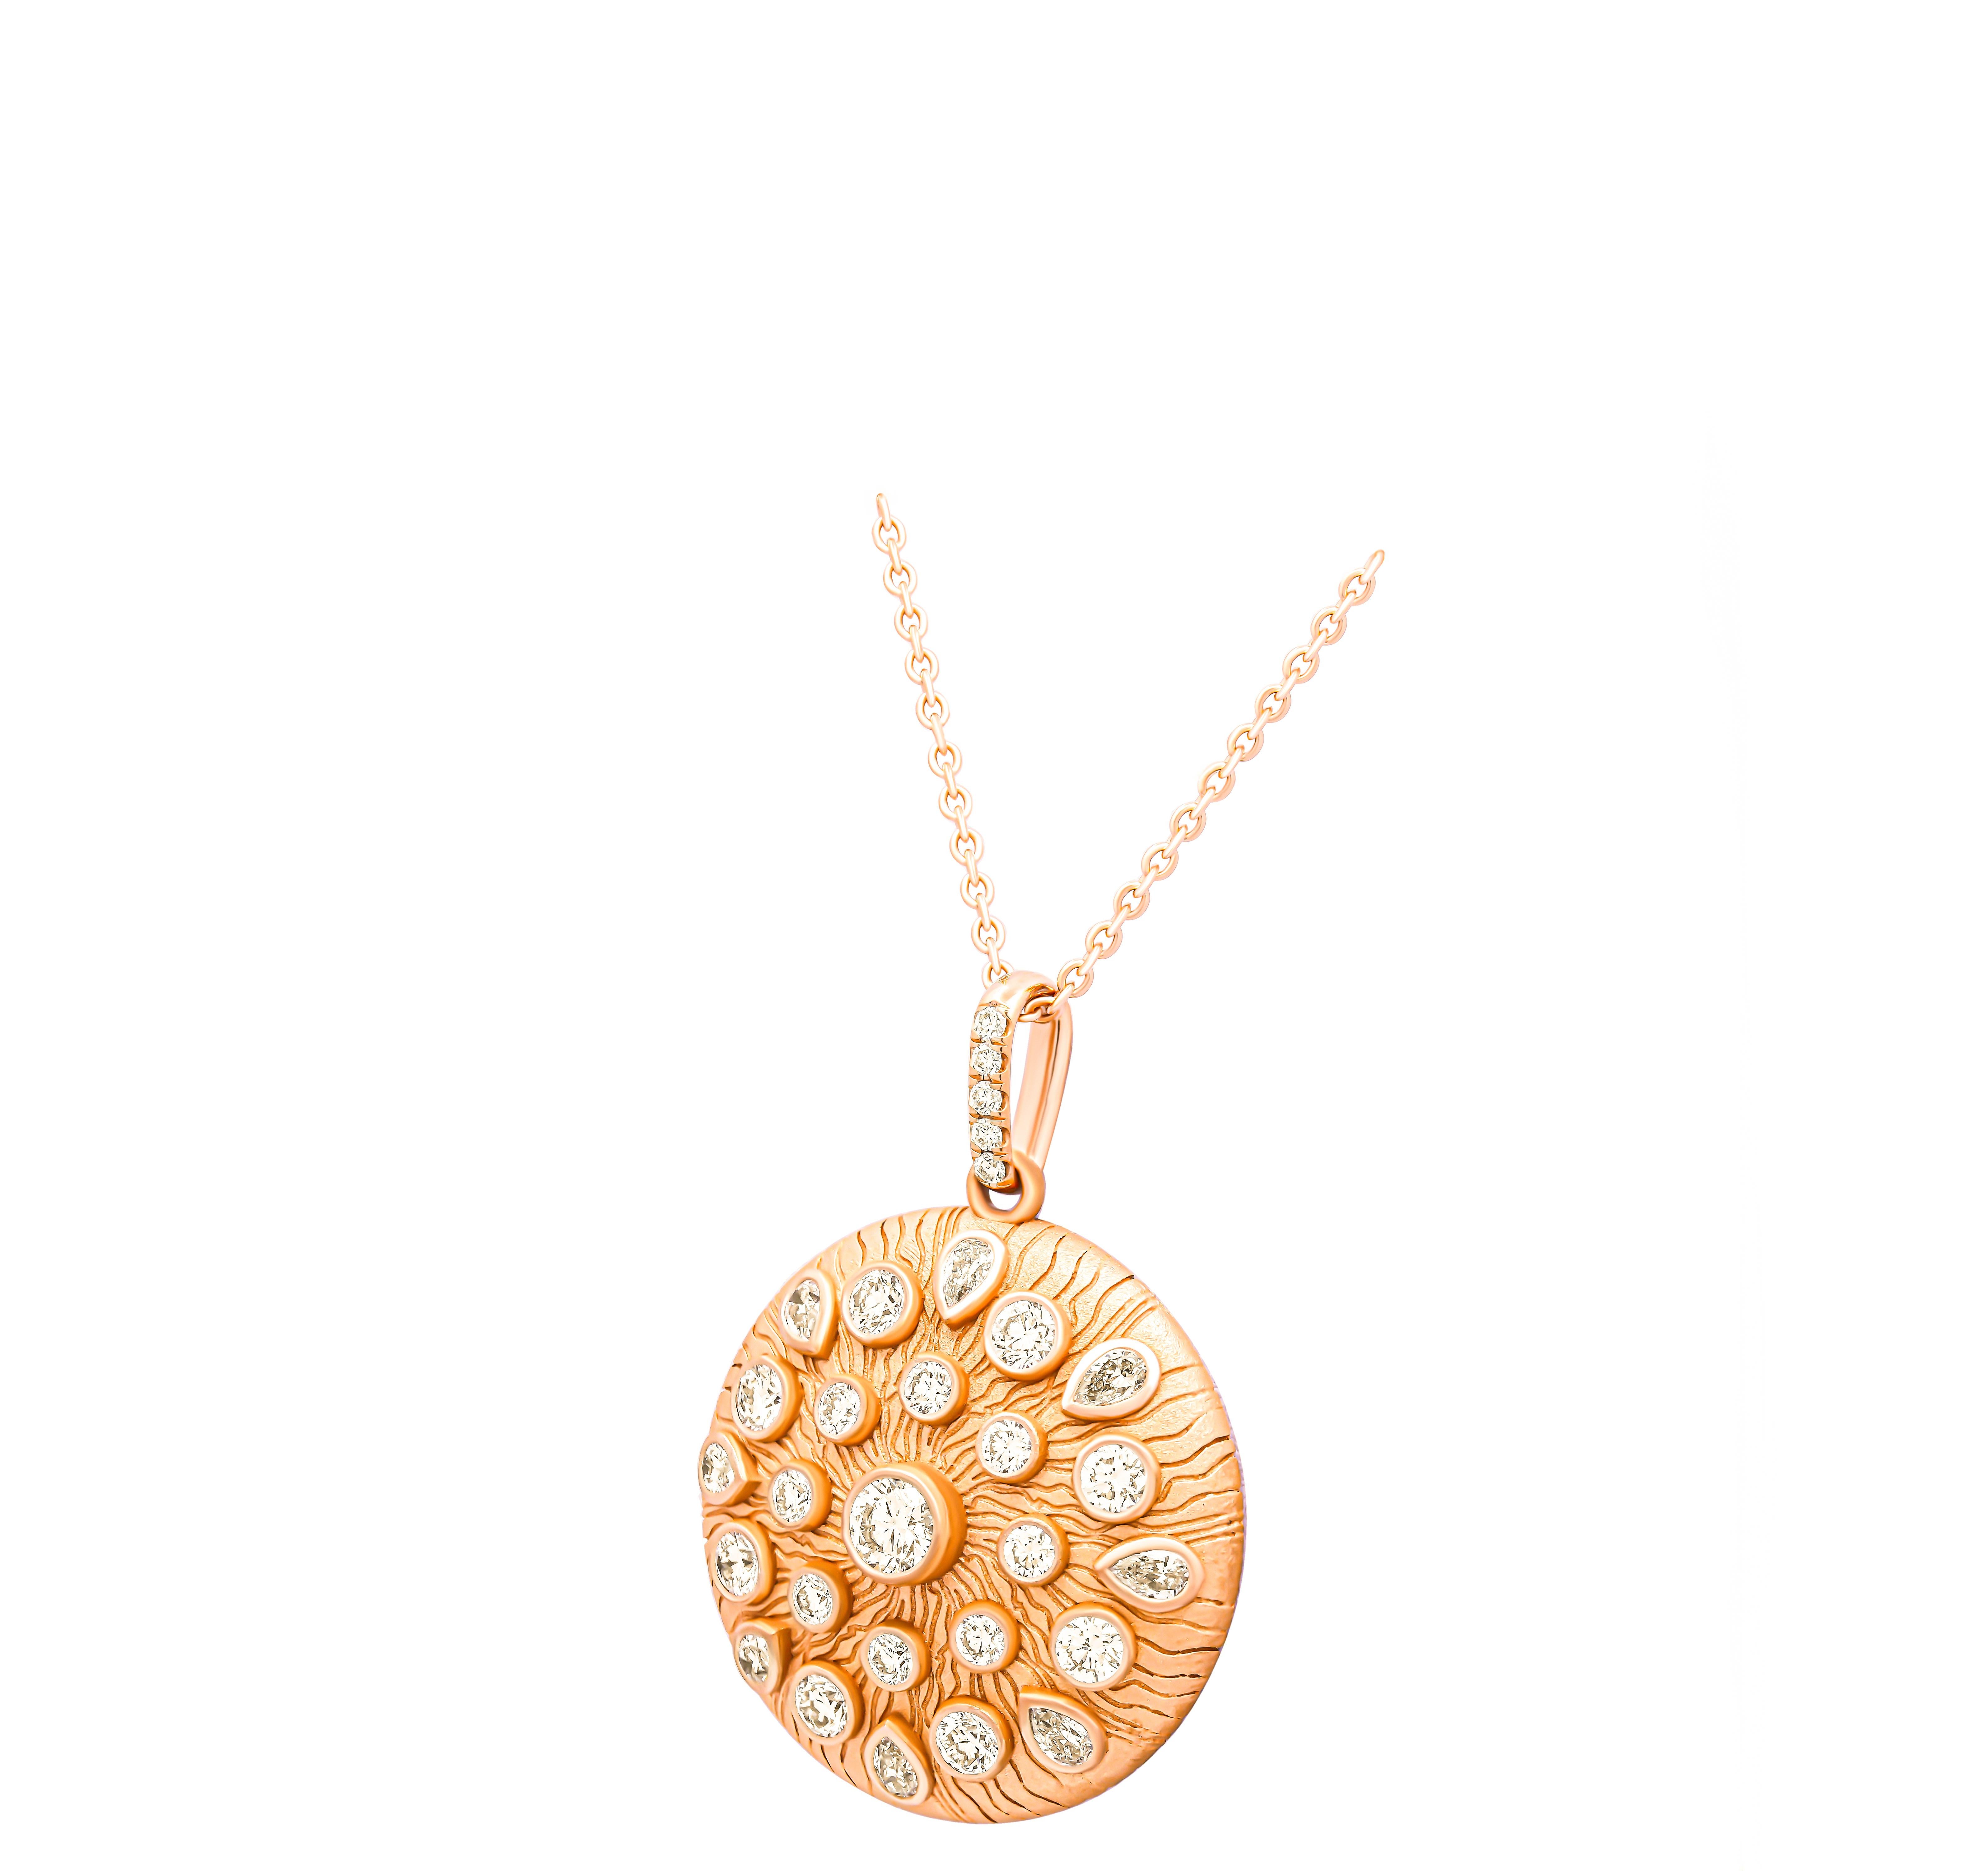 Introducing our exquisite Medallion Pendant crafted in luxurious 18K Rose Gold, an embodiment of timeless elegance and sophistication. The centerpiece of this stunning pendant is a GIA certified 0.50-carat H VS1 round-shaped diamond, distinguished